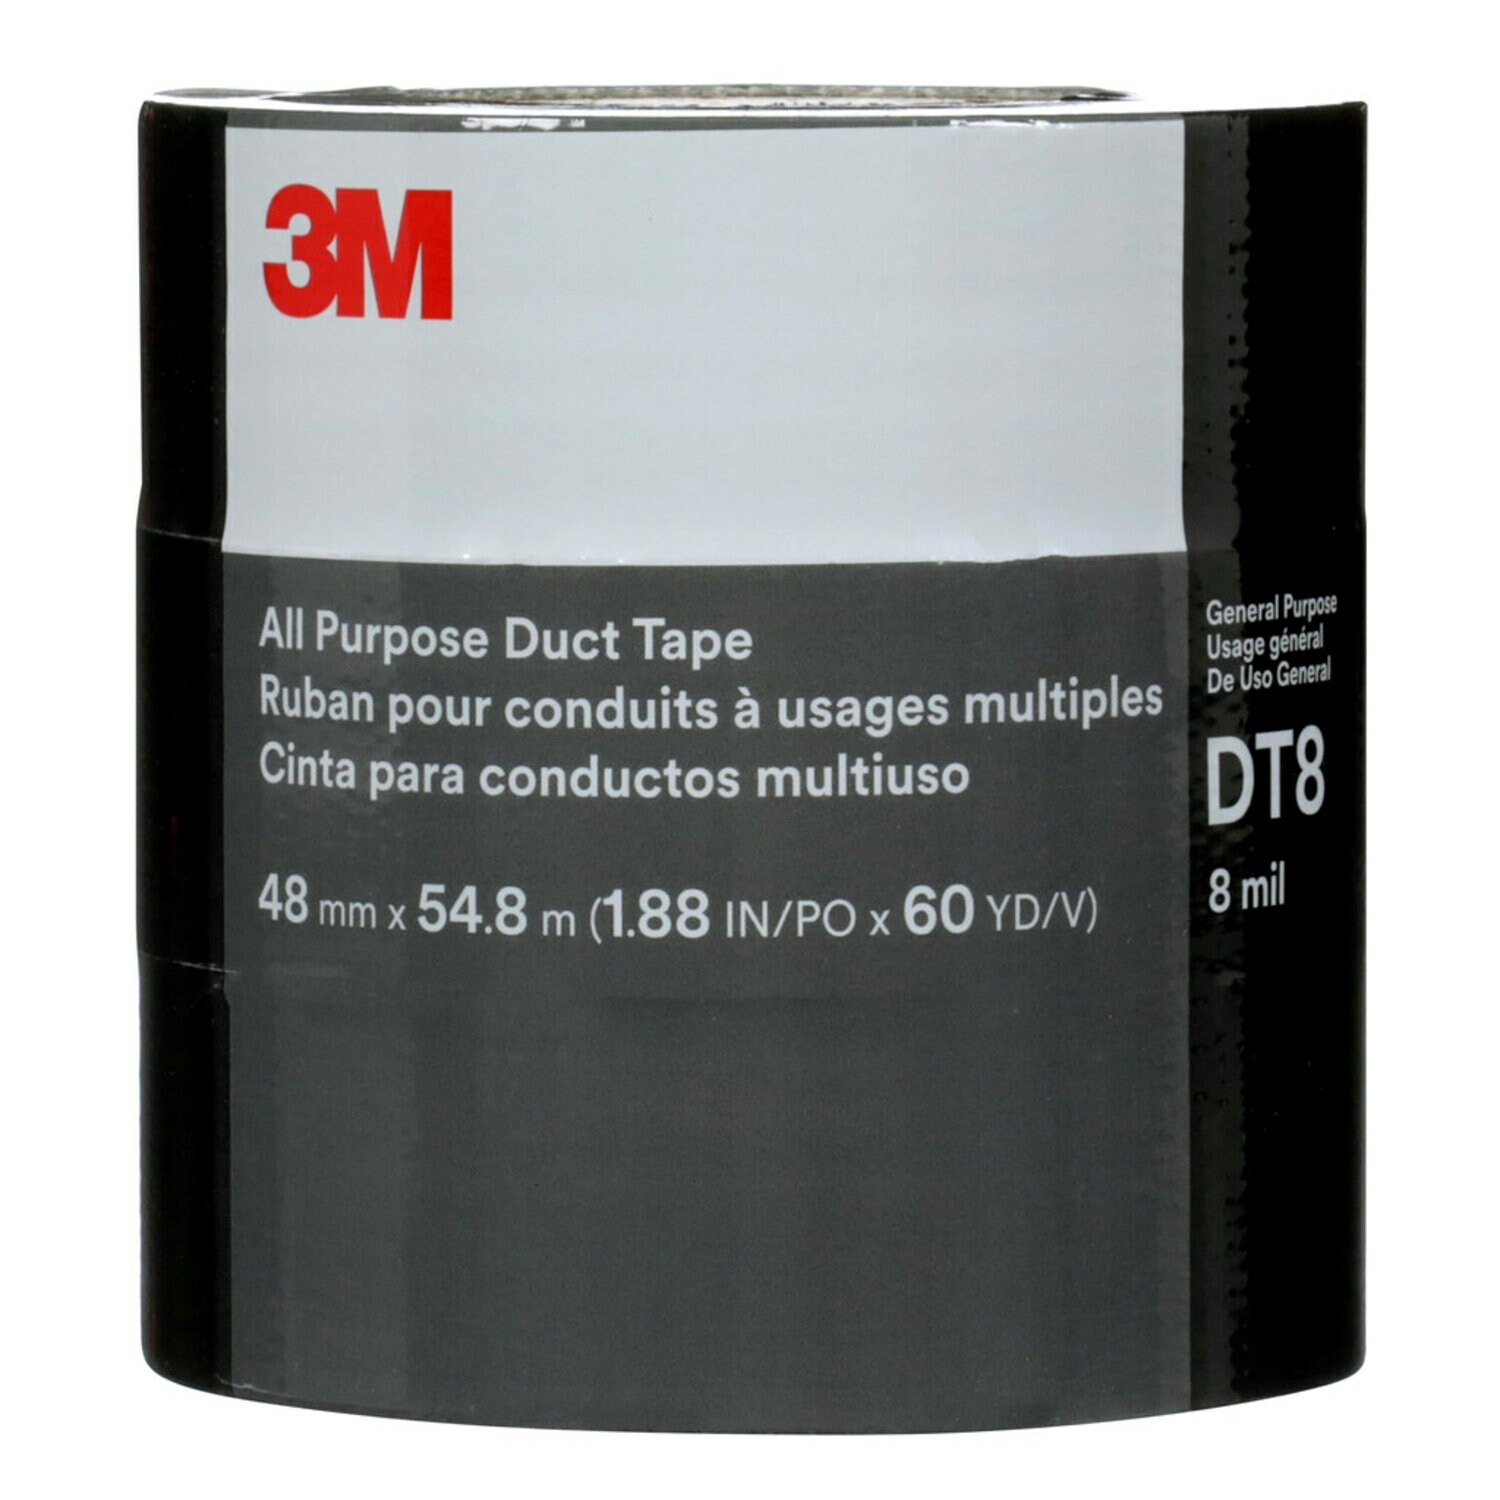 7100253082 - 3M All Purpose Duct Tape DT8, Black, 48 mm x 54.8 m, 8 mil, (3
Roll/Pack) 24 Roll/Case